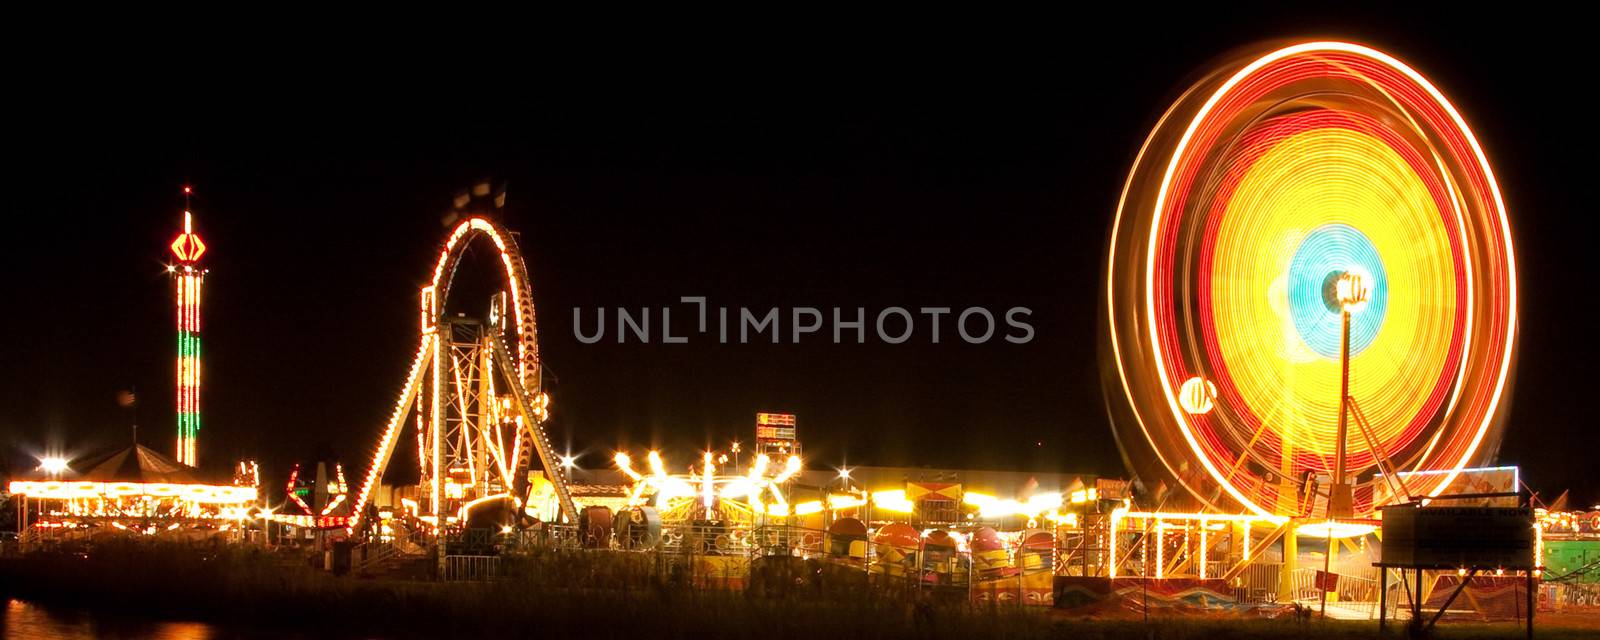 Funfair at night by CelsoDiniz